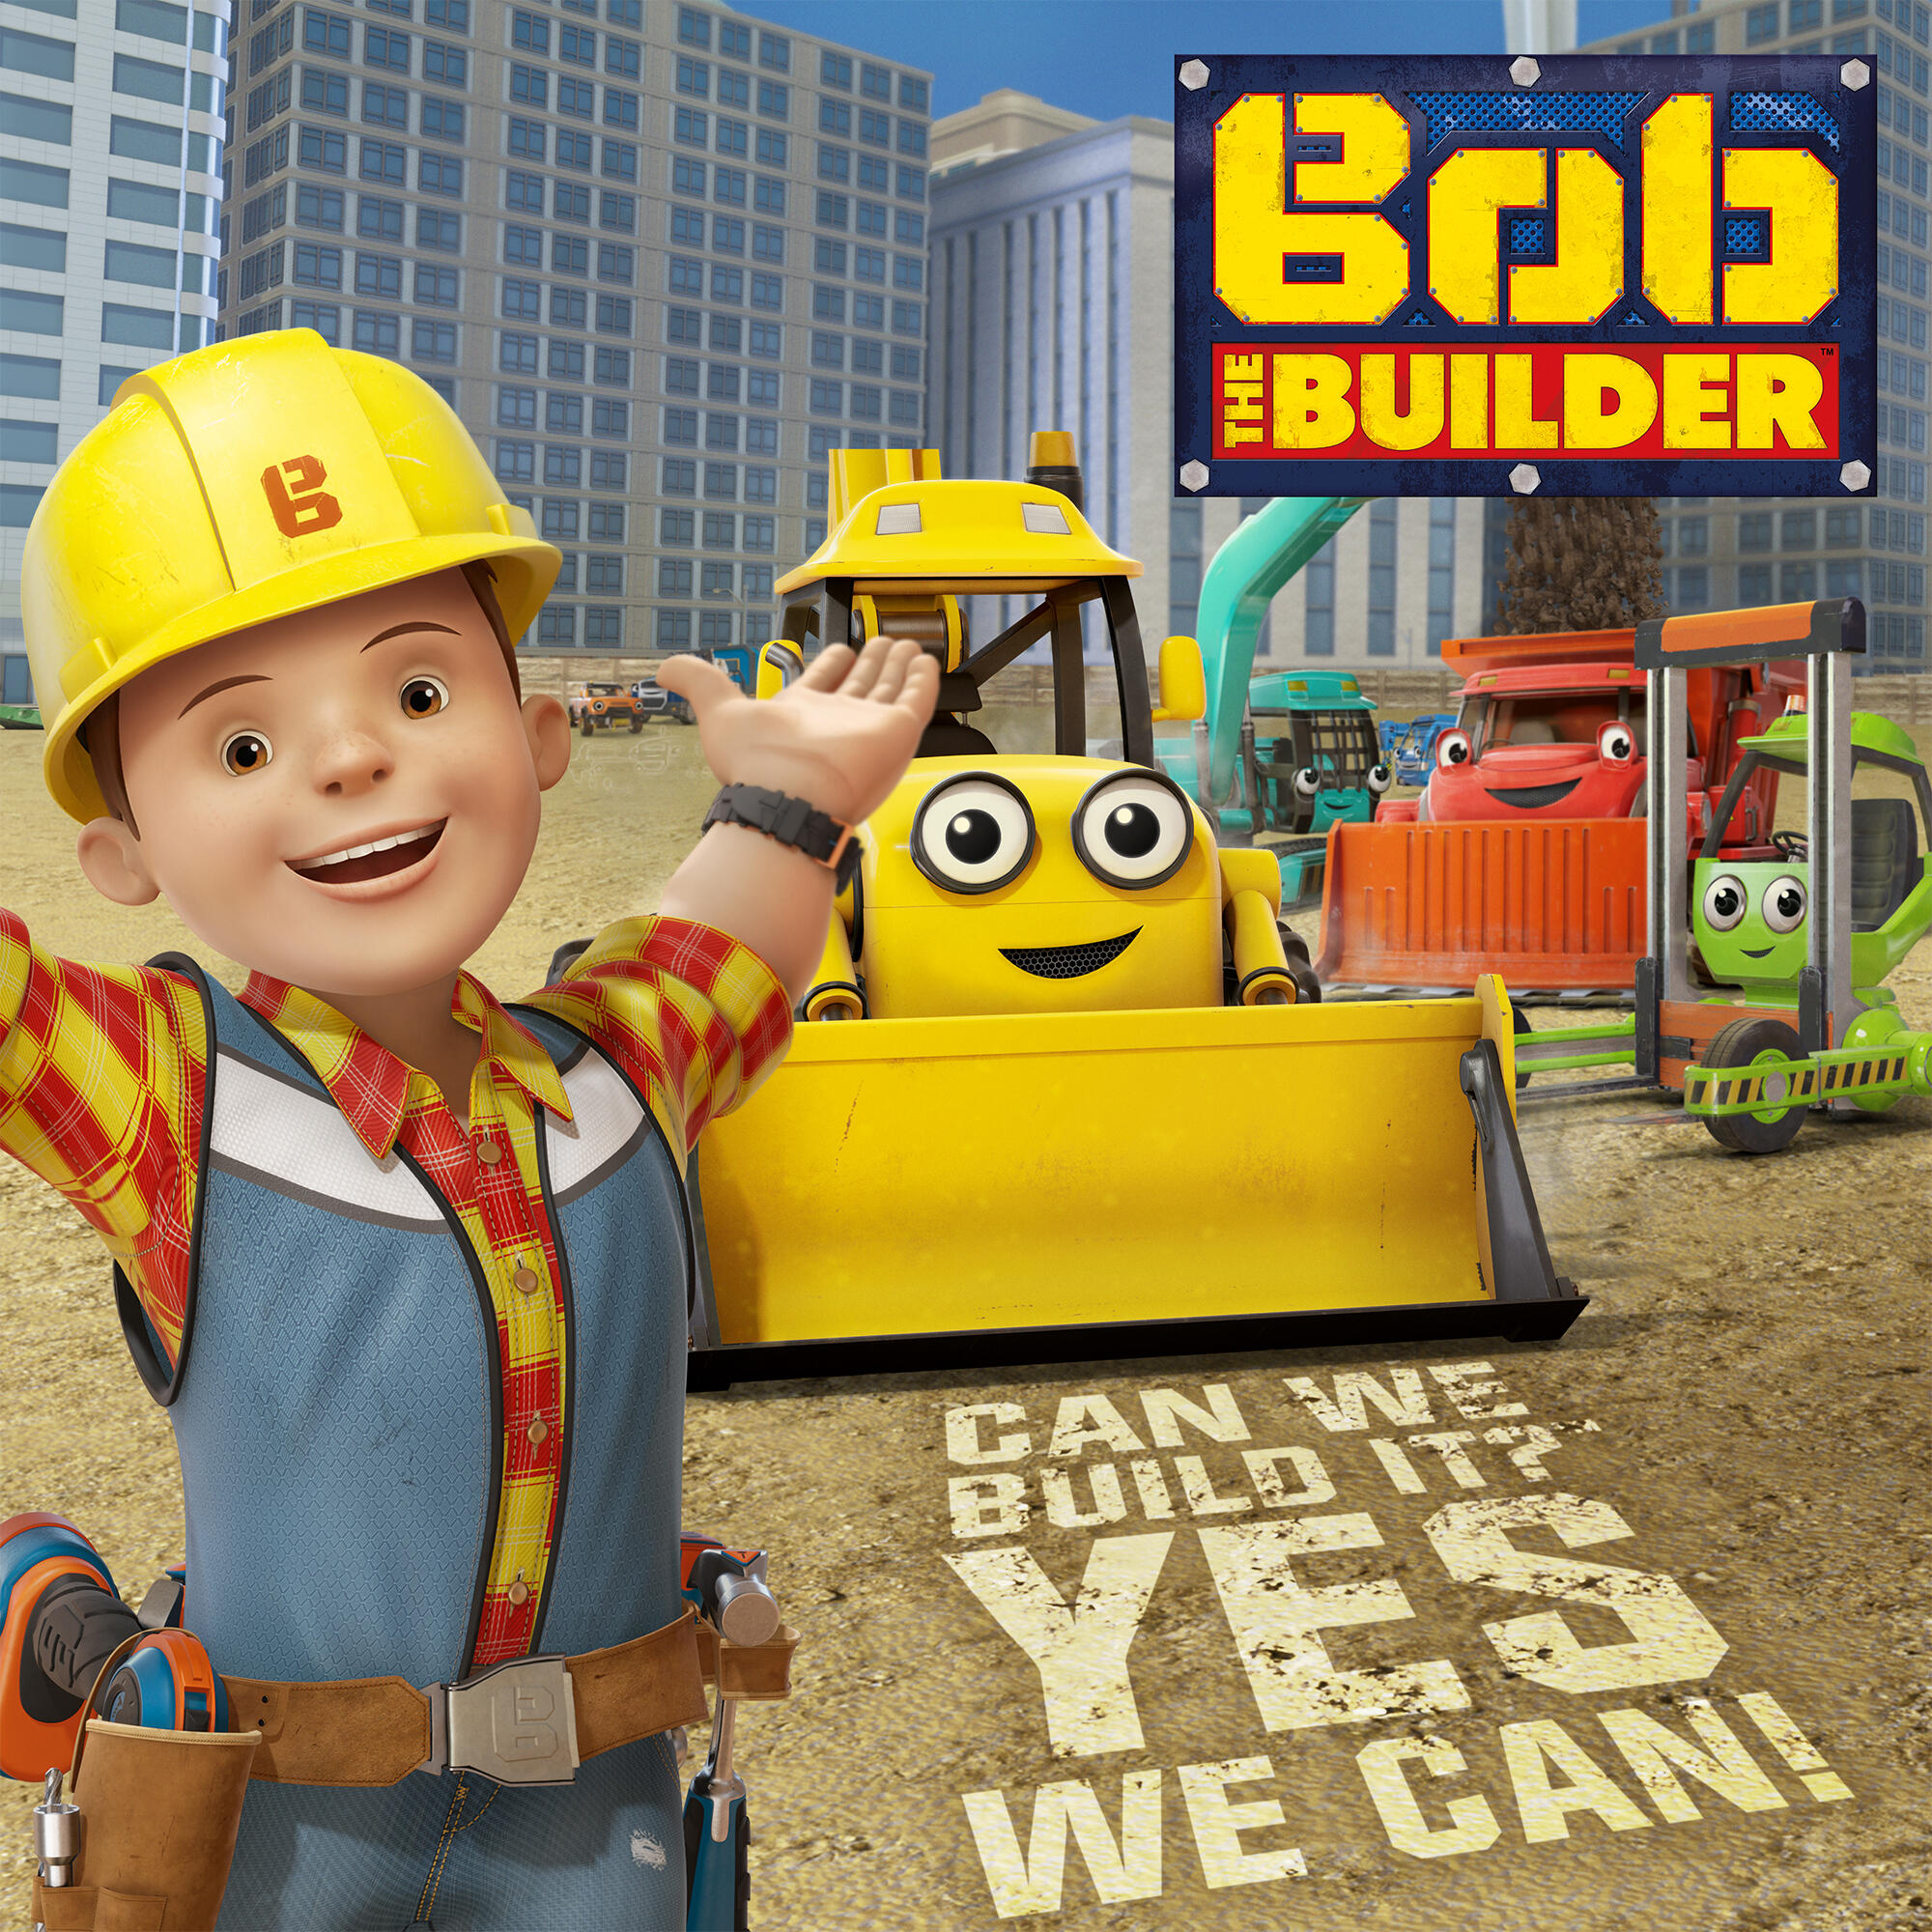 Bob The Builder | www.informationsecuritysummit.org